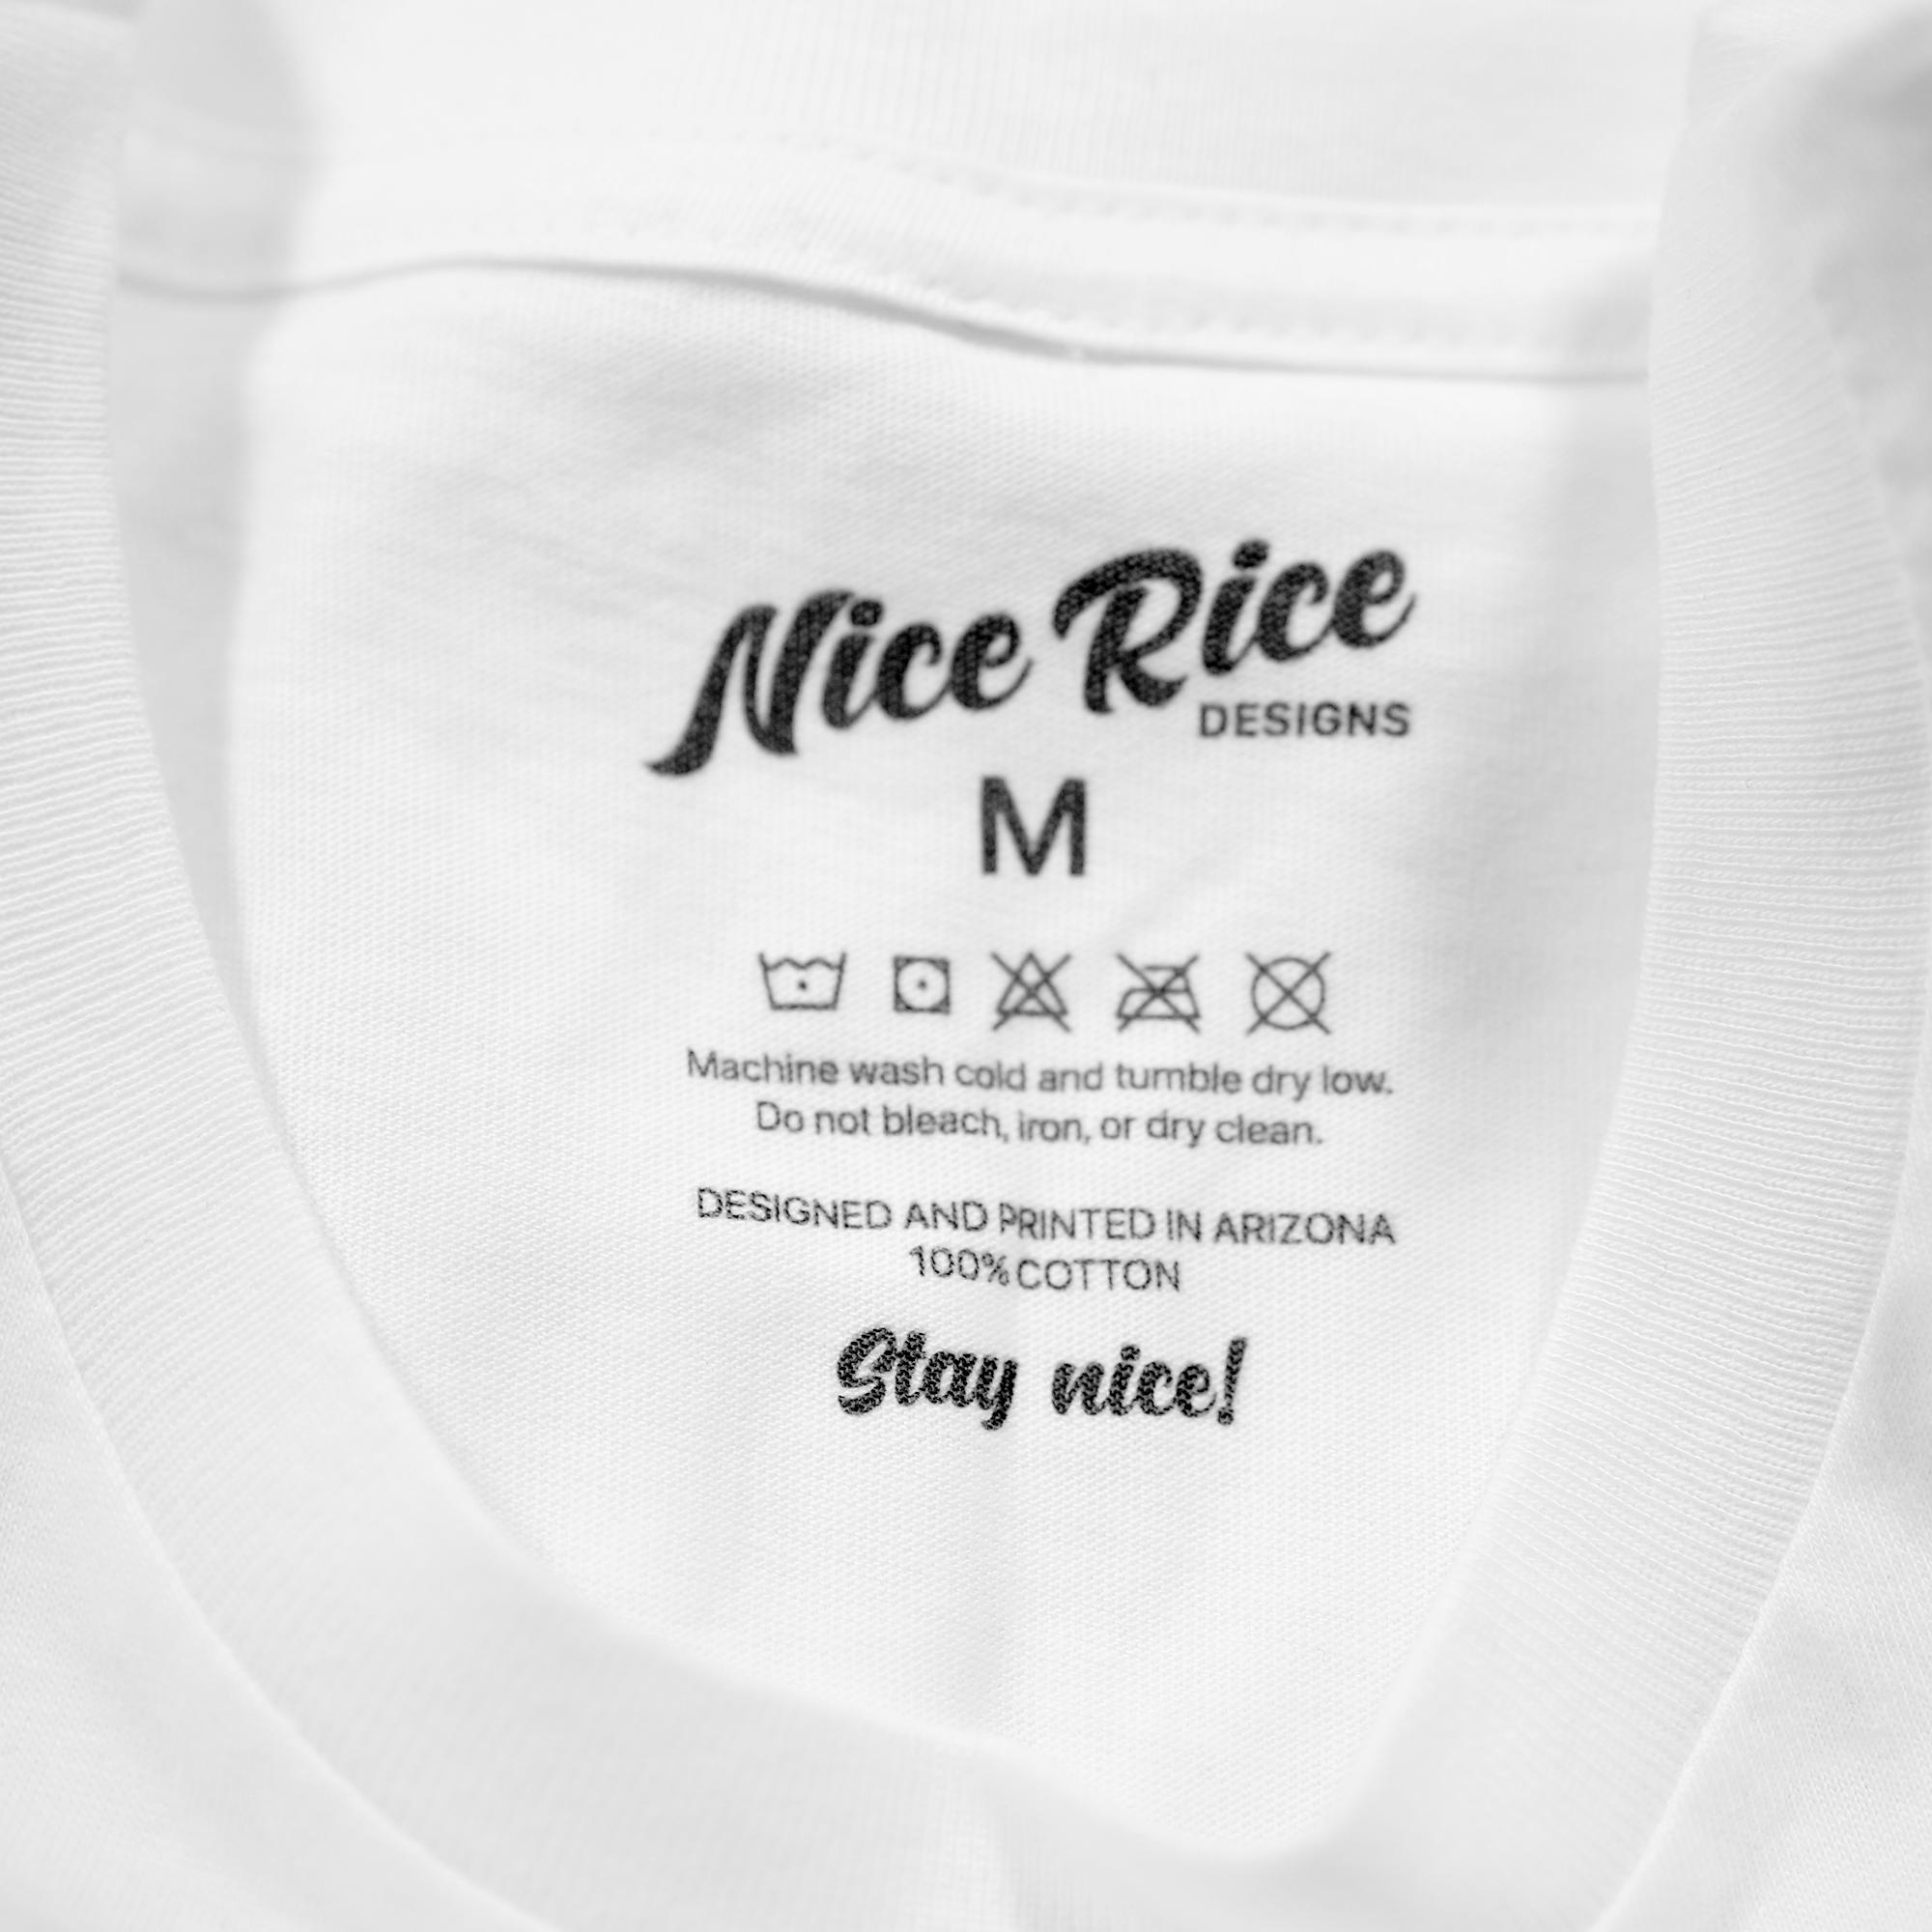 Shitter Was Full Shirt by Nice Rice Designs